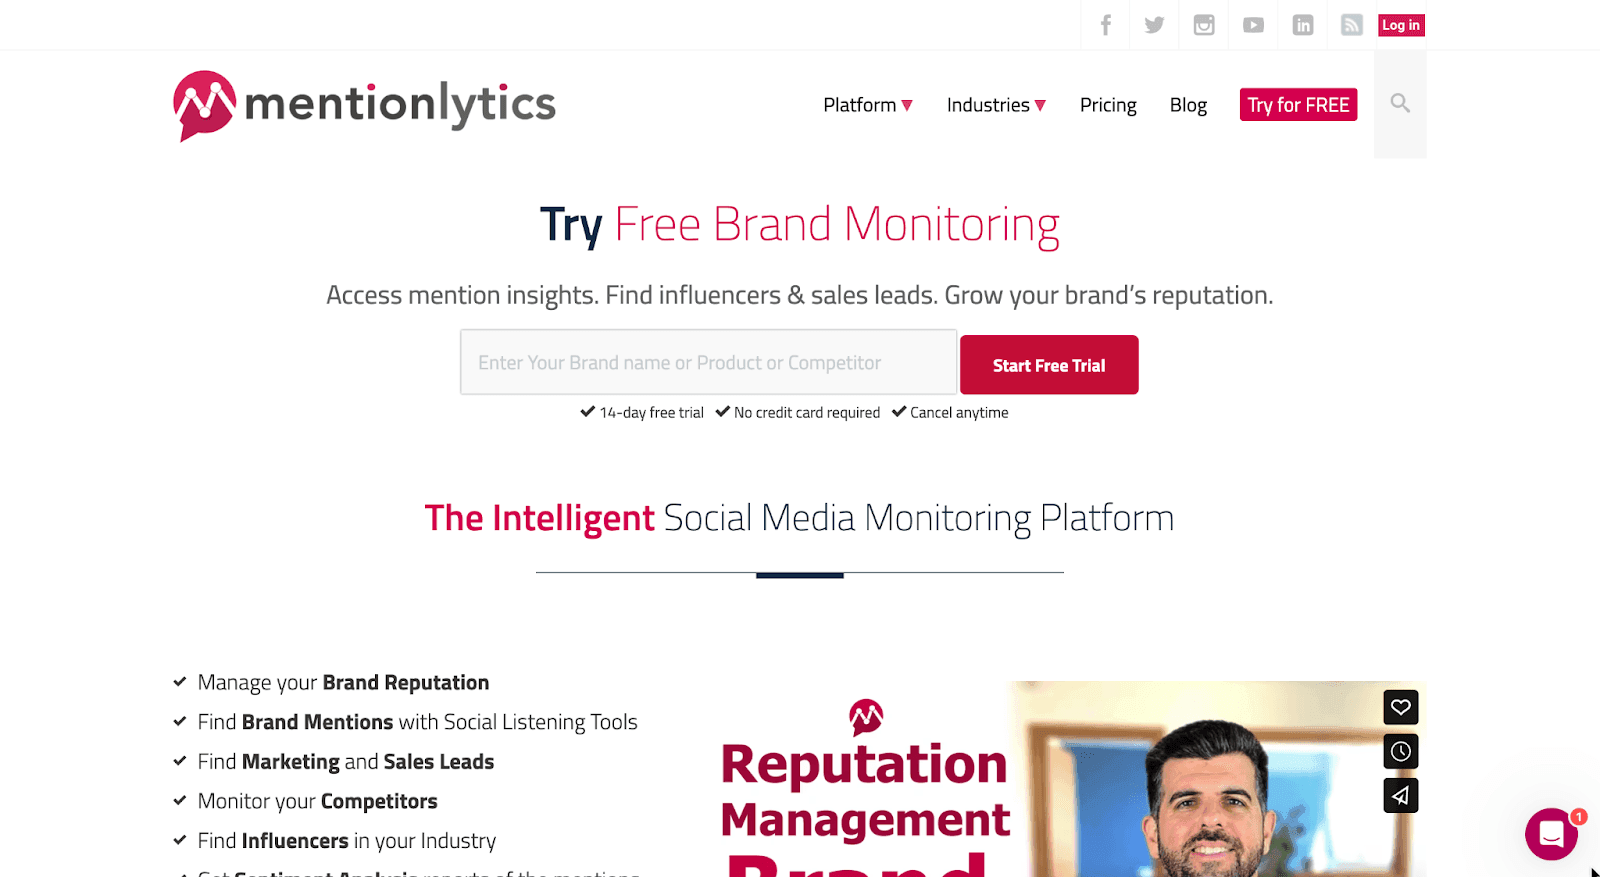 Try free brand monitoring - access mention insights. Find influencers & sales leads. Grow your brand's reputation